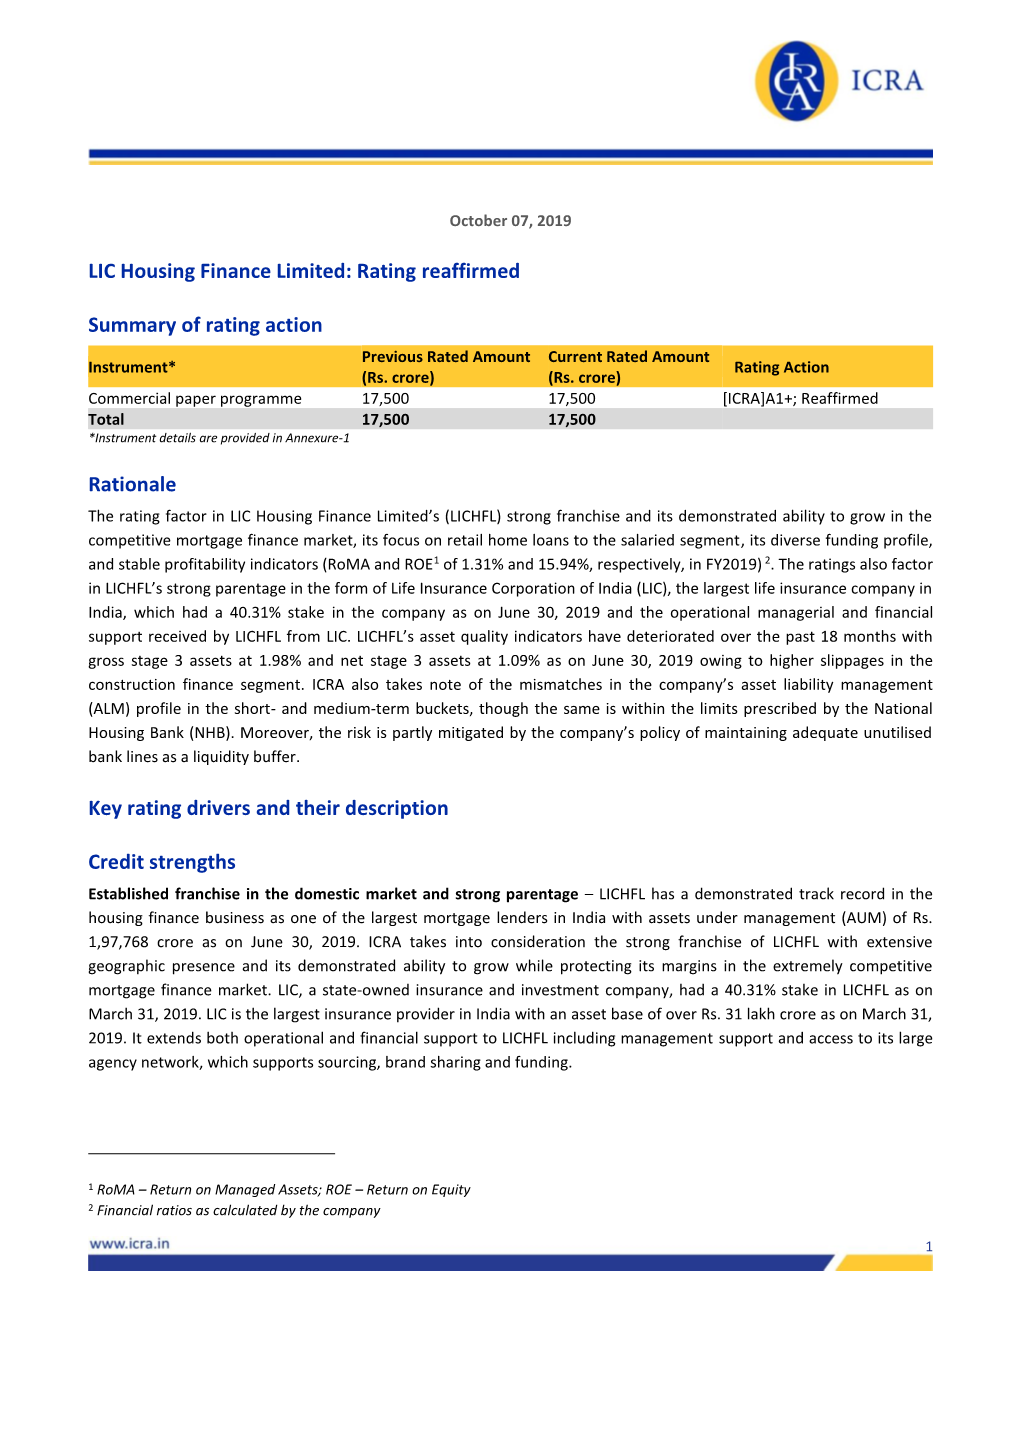 LIC Housing Finance Limited: Rating Reaffirmed Summary